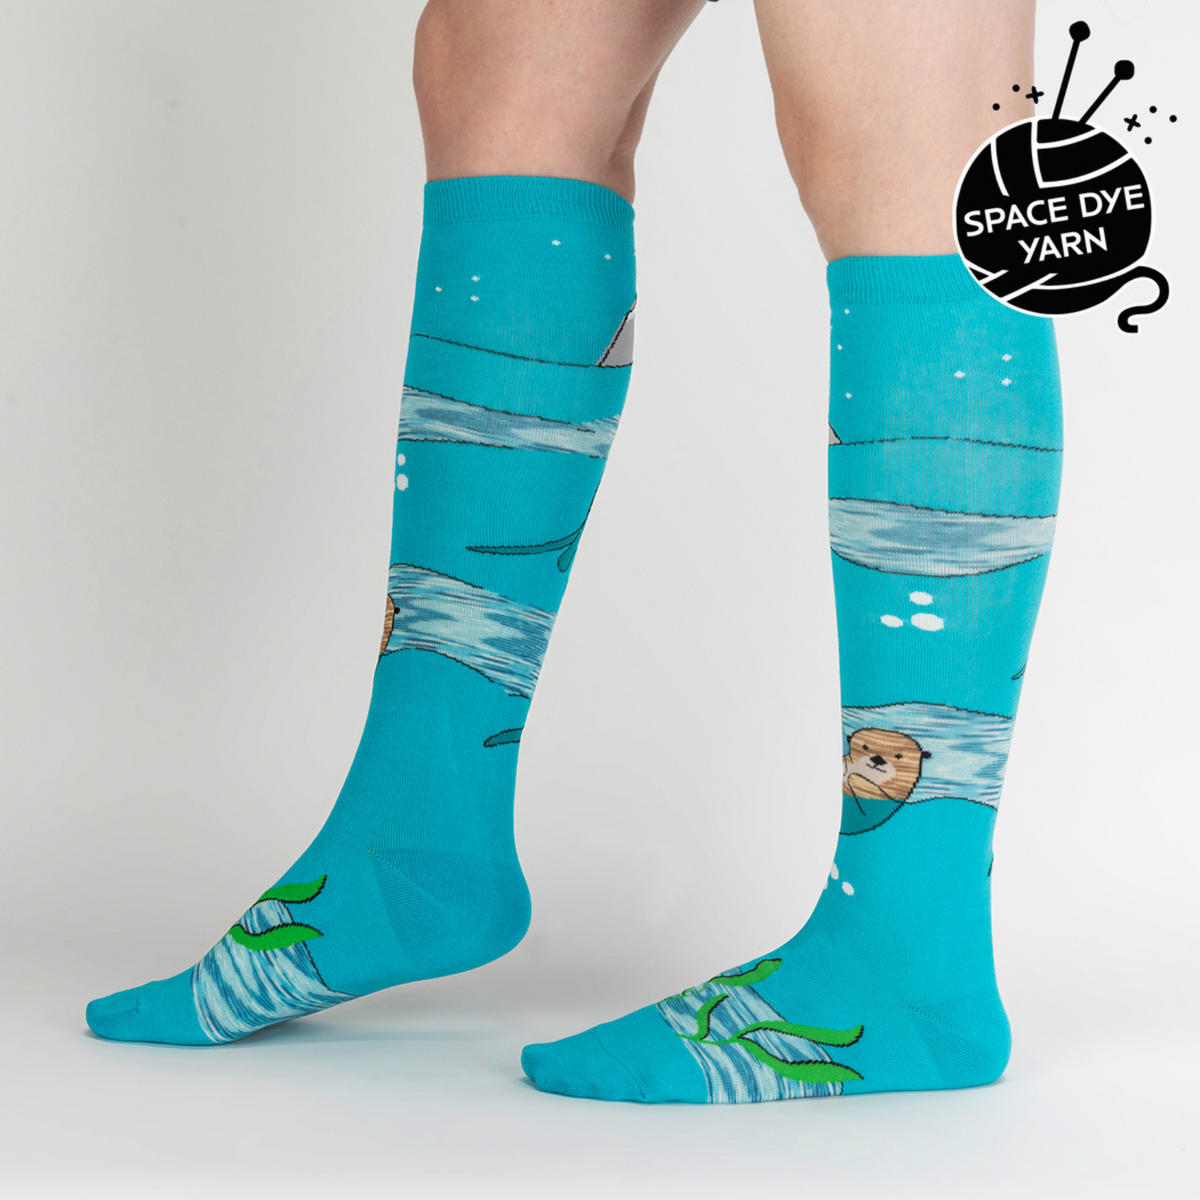 Sock It To Me Plays Well With Otters women&#39;s sock featuring blue knee high with otters and a puffin bird on model seen from side